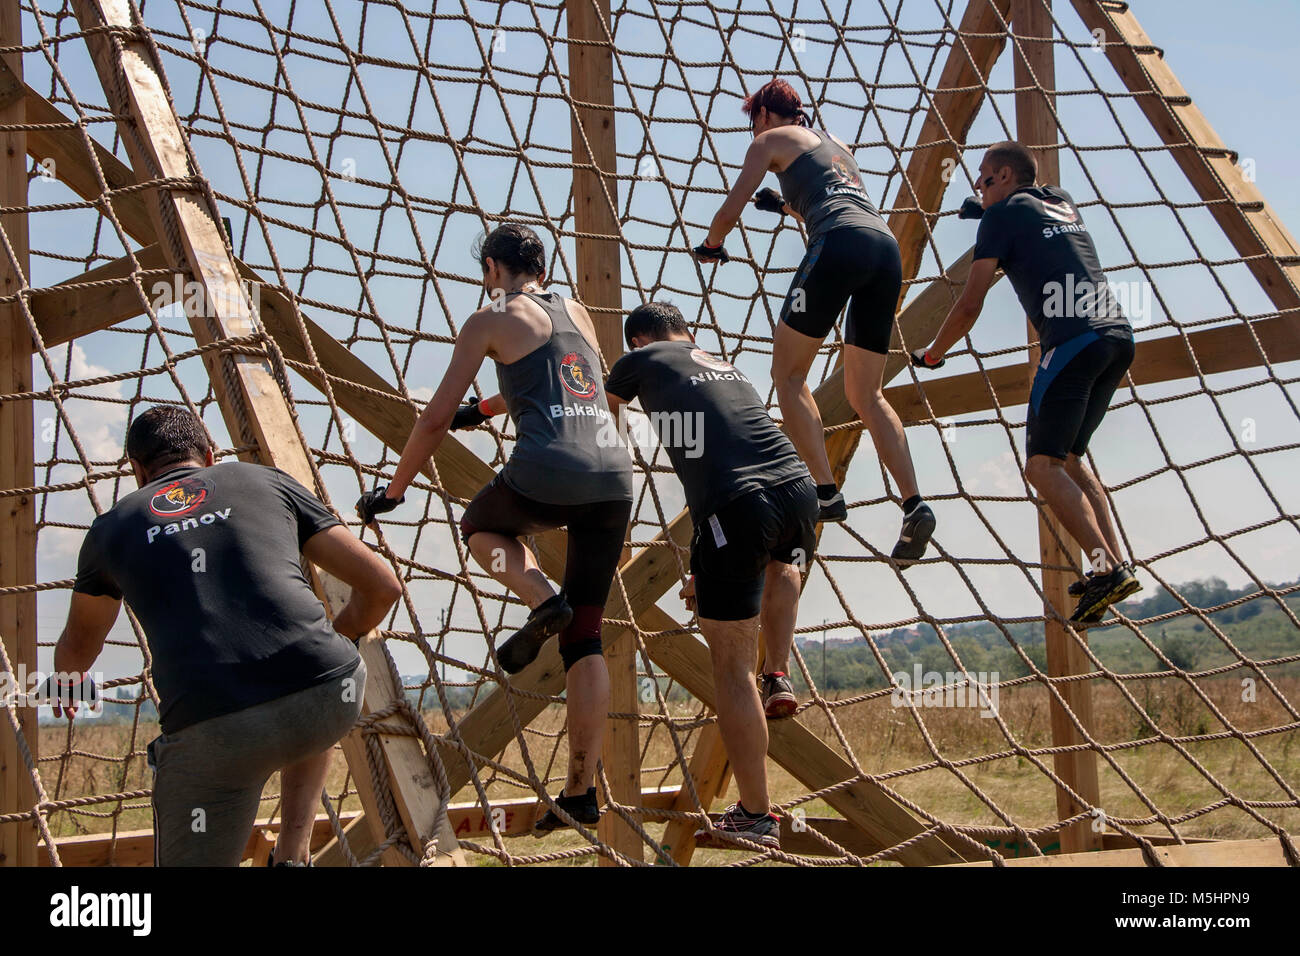 A team of men and women climbing a cargo net at the strength race Legion Run held in Sofia, Bulgaria on 26 July 2014 Stock Photo